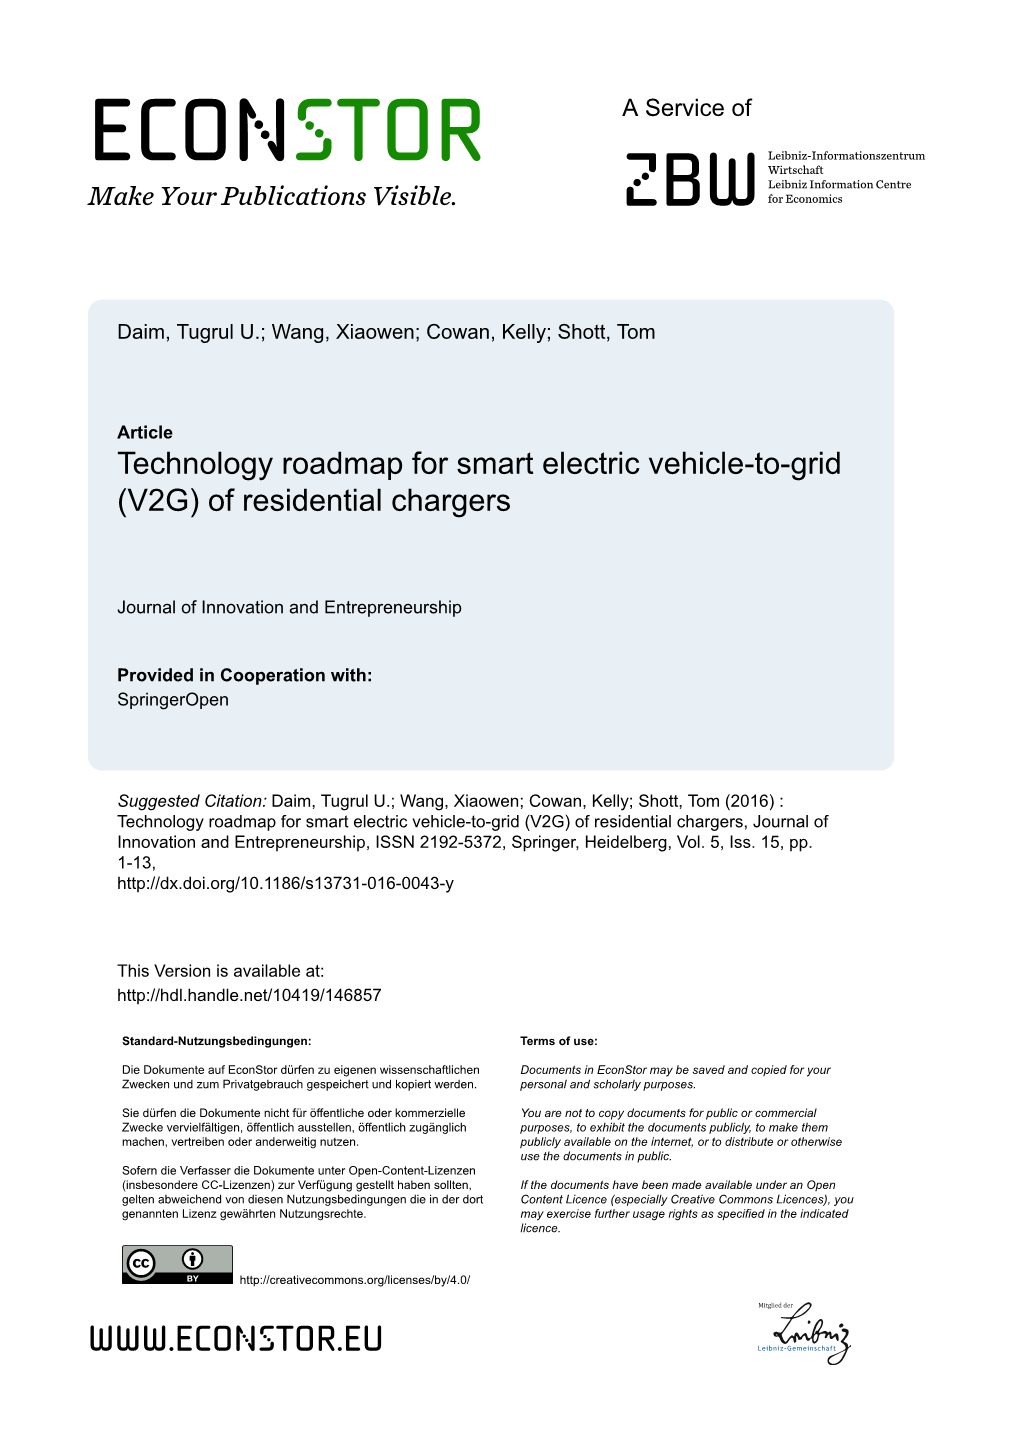 Technology Roadmap for Smart Electric Vehicle-To-Grid (V2G) of Residential Chargers